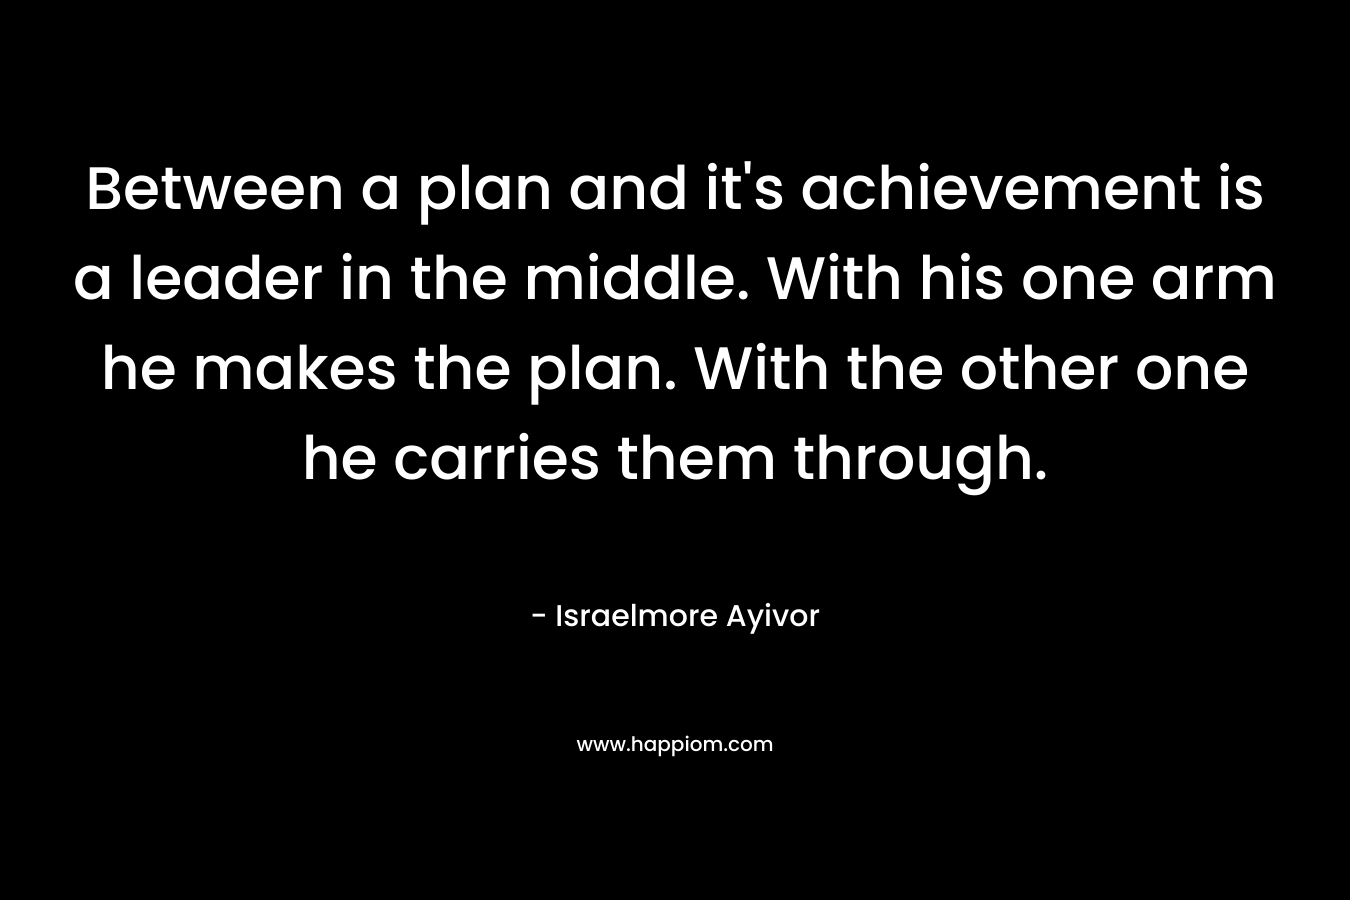 Between a plan and it's achievement is a leader in the middle. With his one arm he makes the plan. With the other one he carries them through.